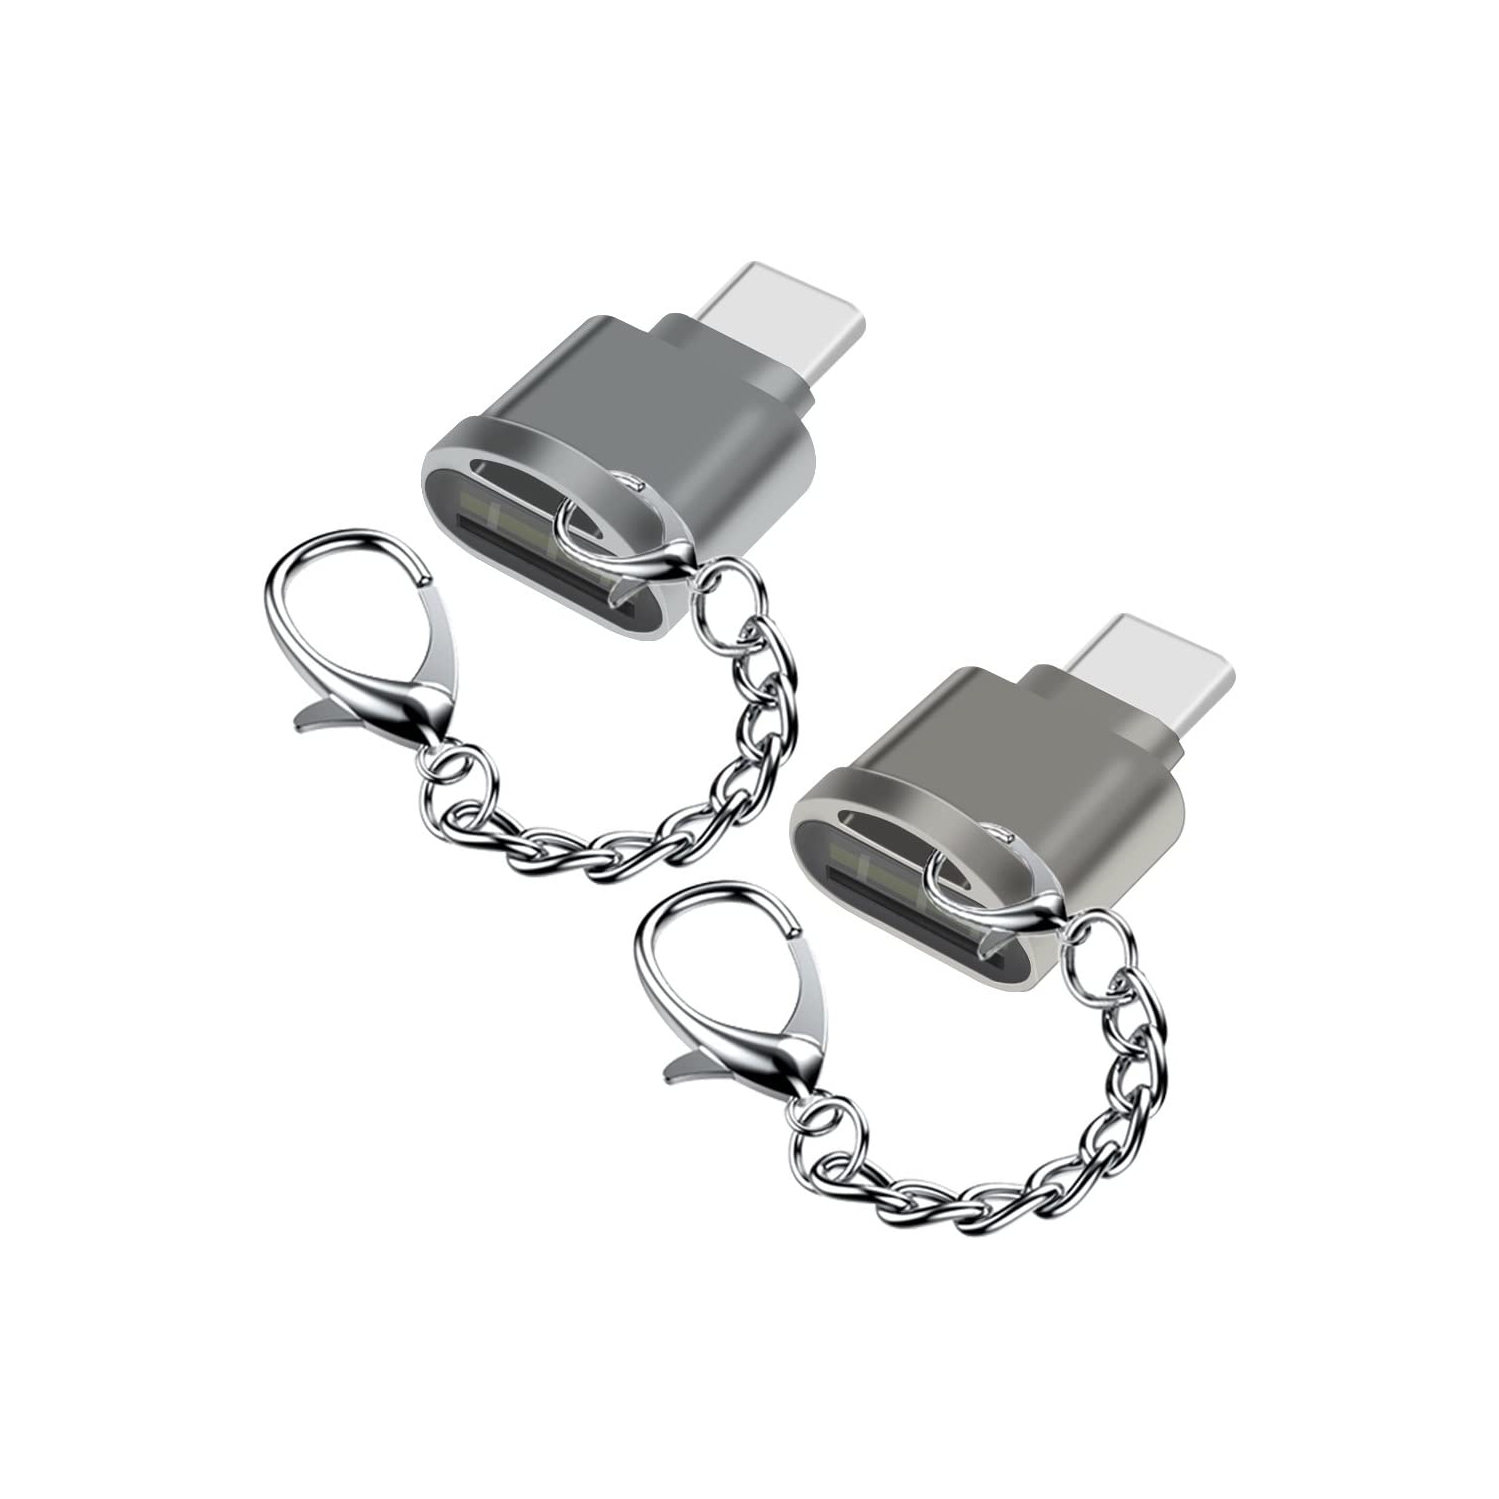 2 Packs USB Type C Card Reader, USB C Micro SD Card Reader with Key Chain for MacBook Pro Samsung Galaxy S8 S8+ Nintendo Switch Nexus 6P 5X LG V20 G6